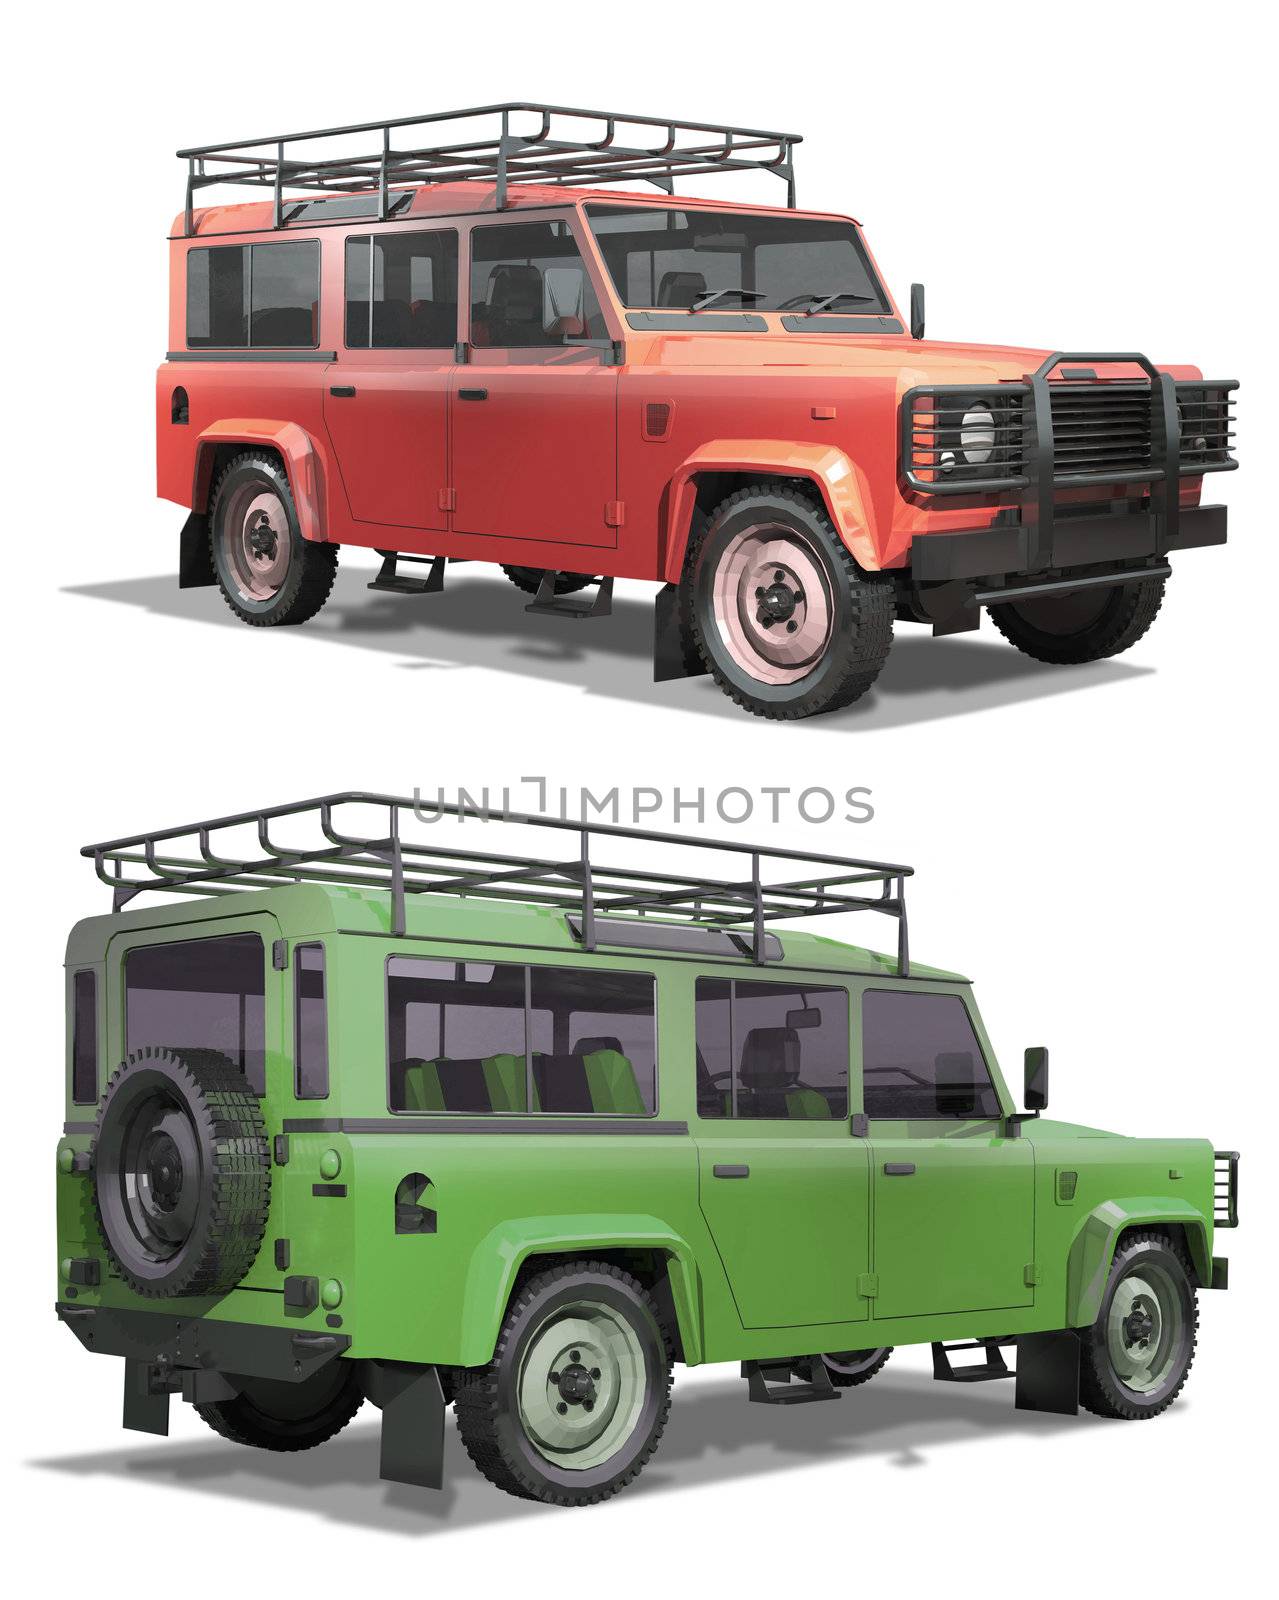 Wheel drive off-road vehicle on a white background. Isolation, render. Ready to apply logo and inscriptions.